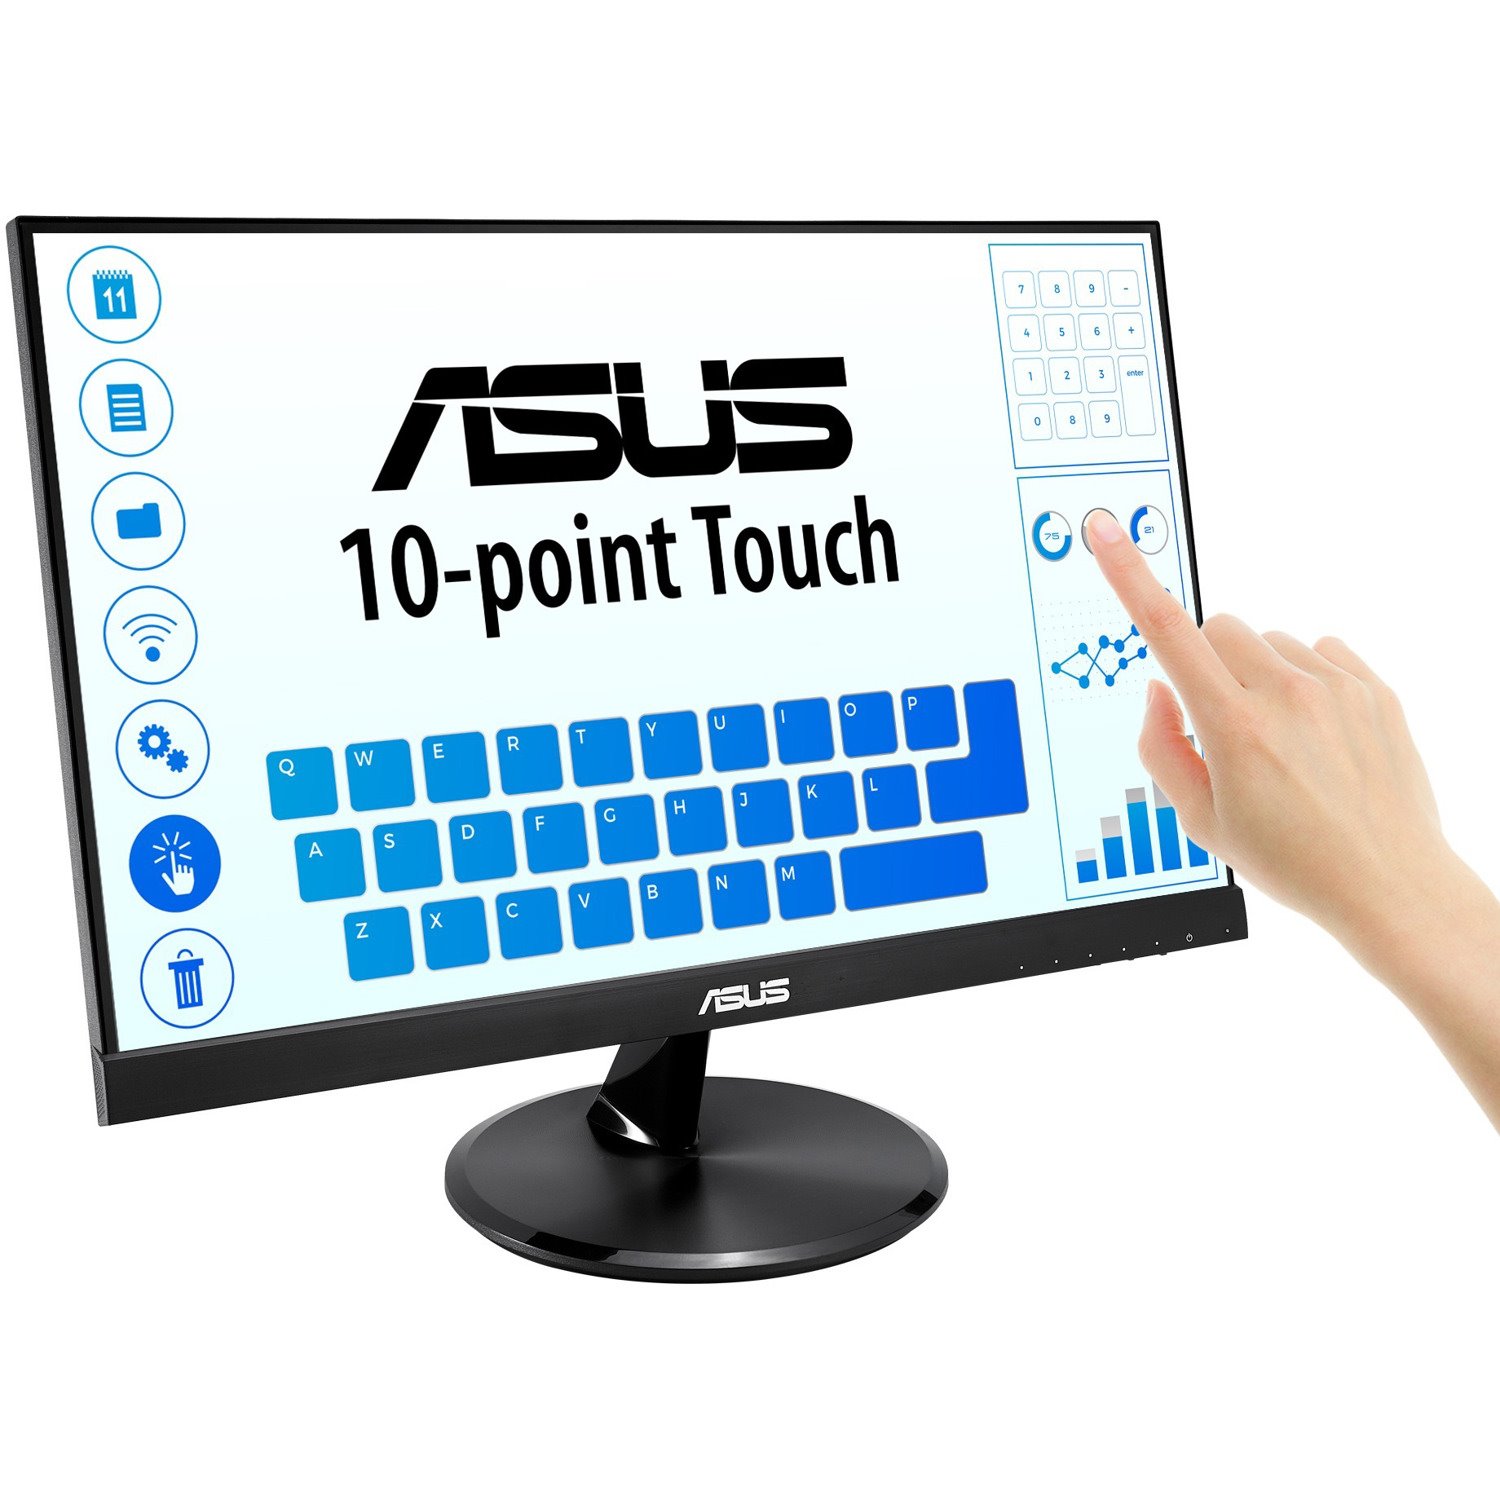 Asus VT229H 22" Class LCD Touchscreen Monitor - 16:9 - 5 ms